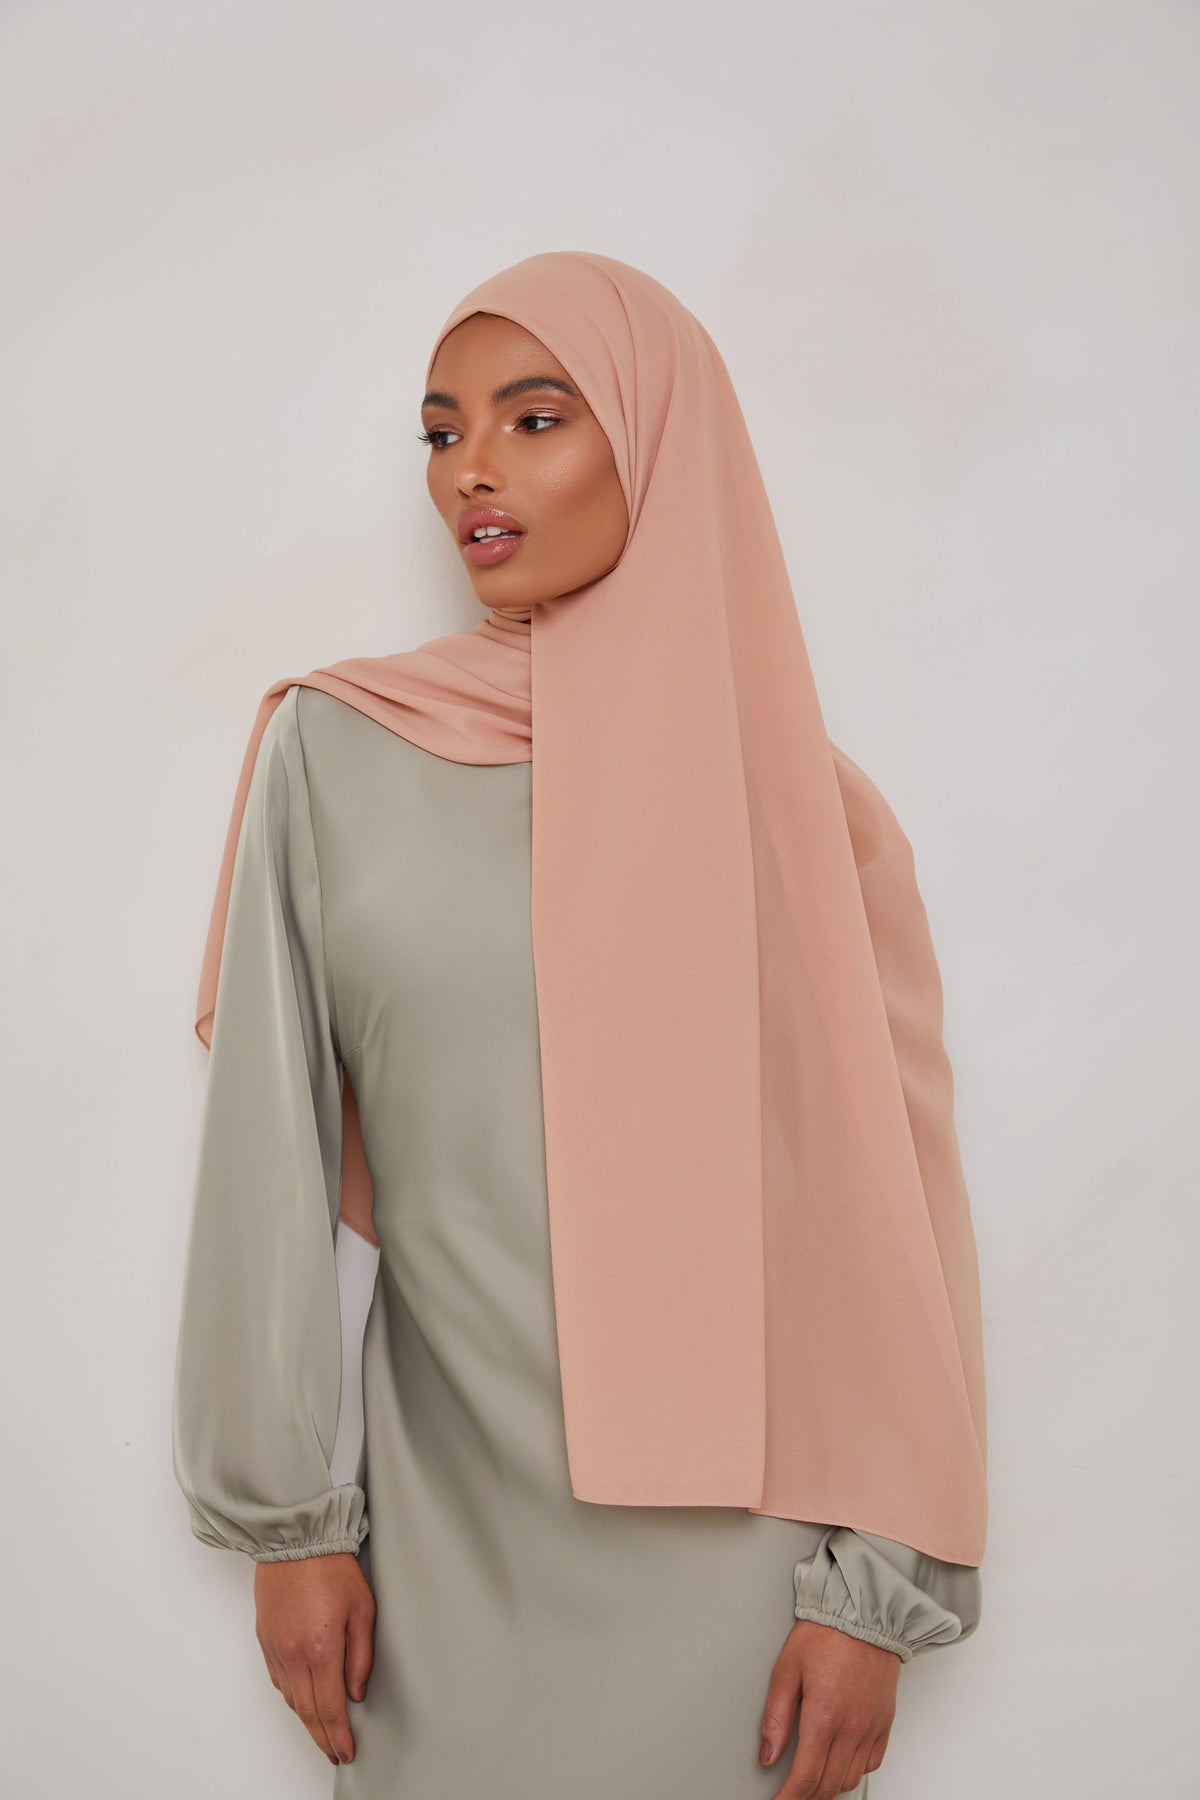 Essential Chiffon Hijab - Almond Scarves & Shawls Veiled Collection 